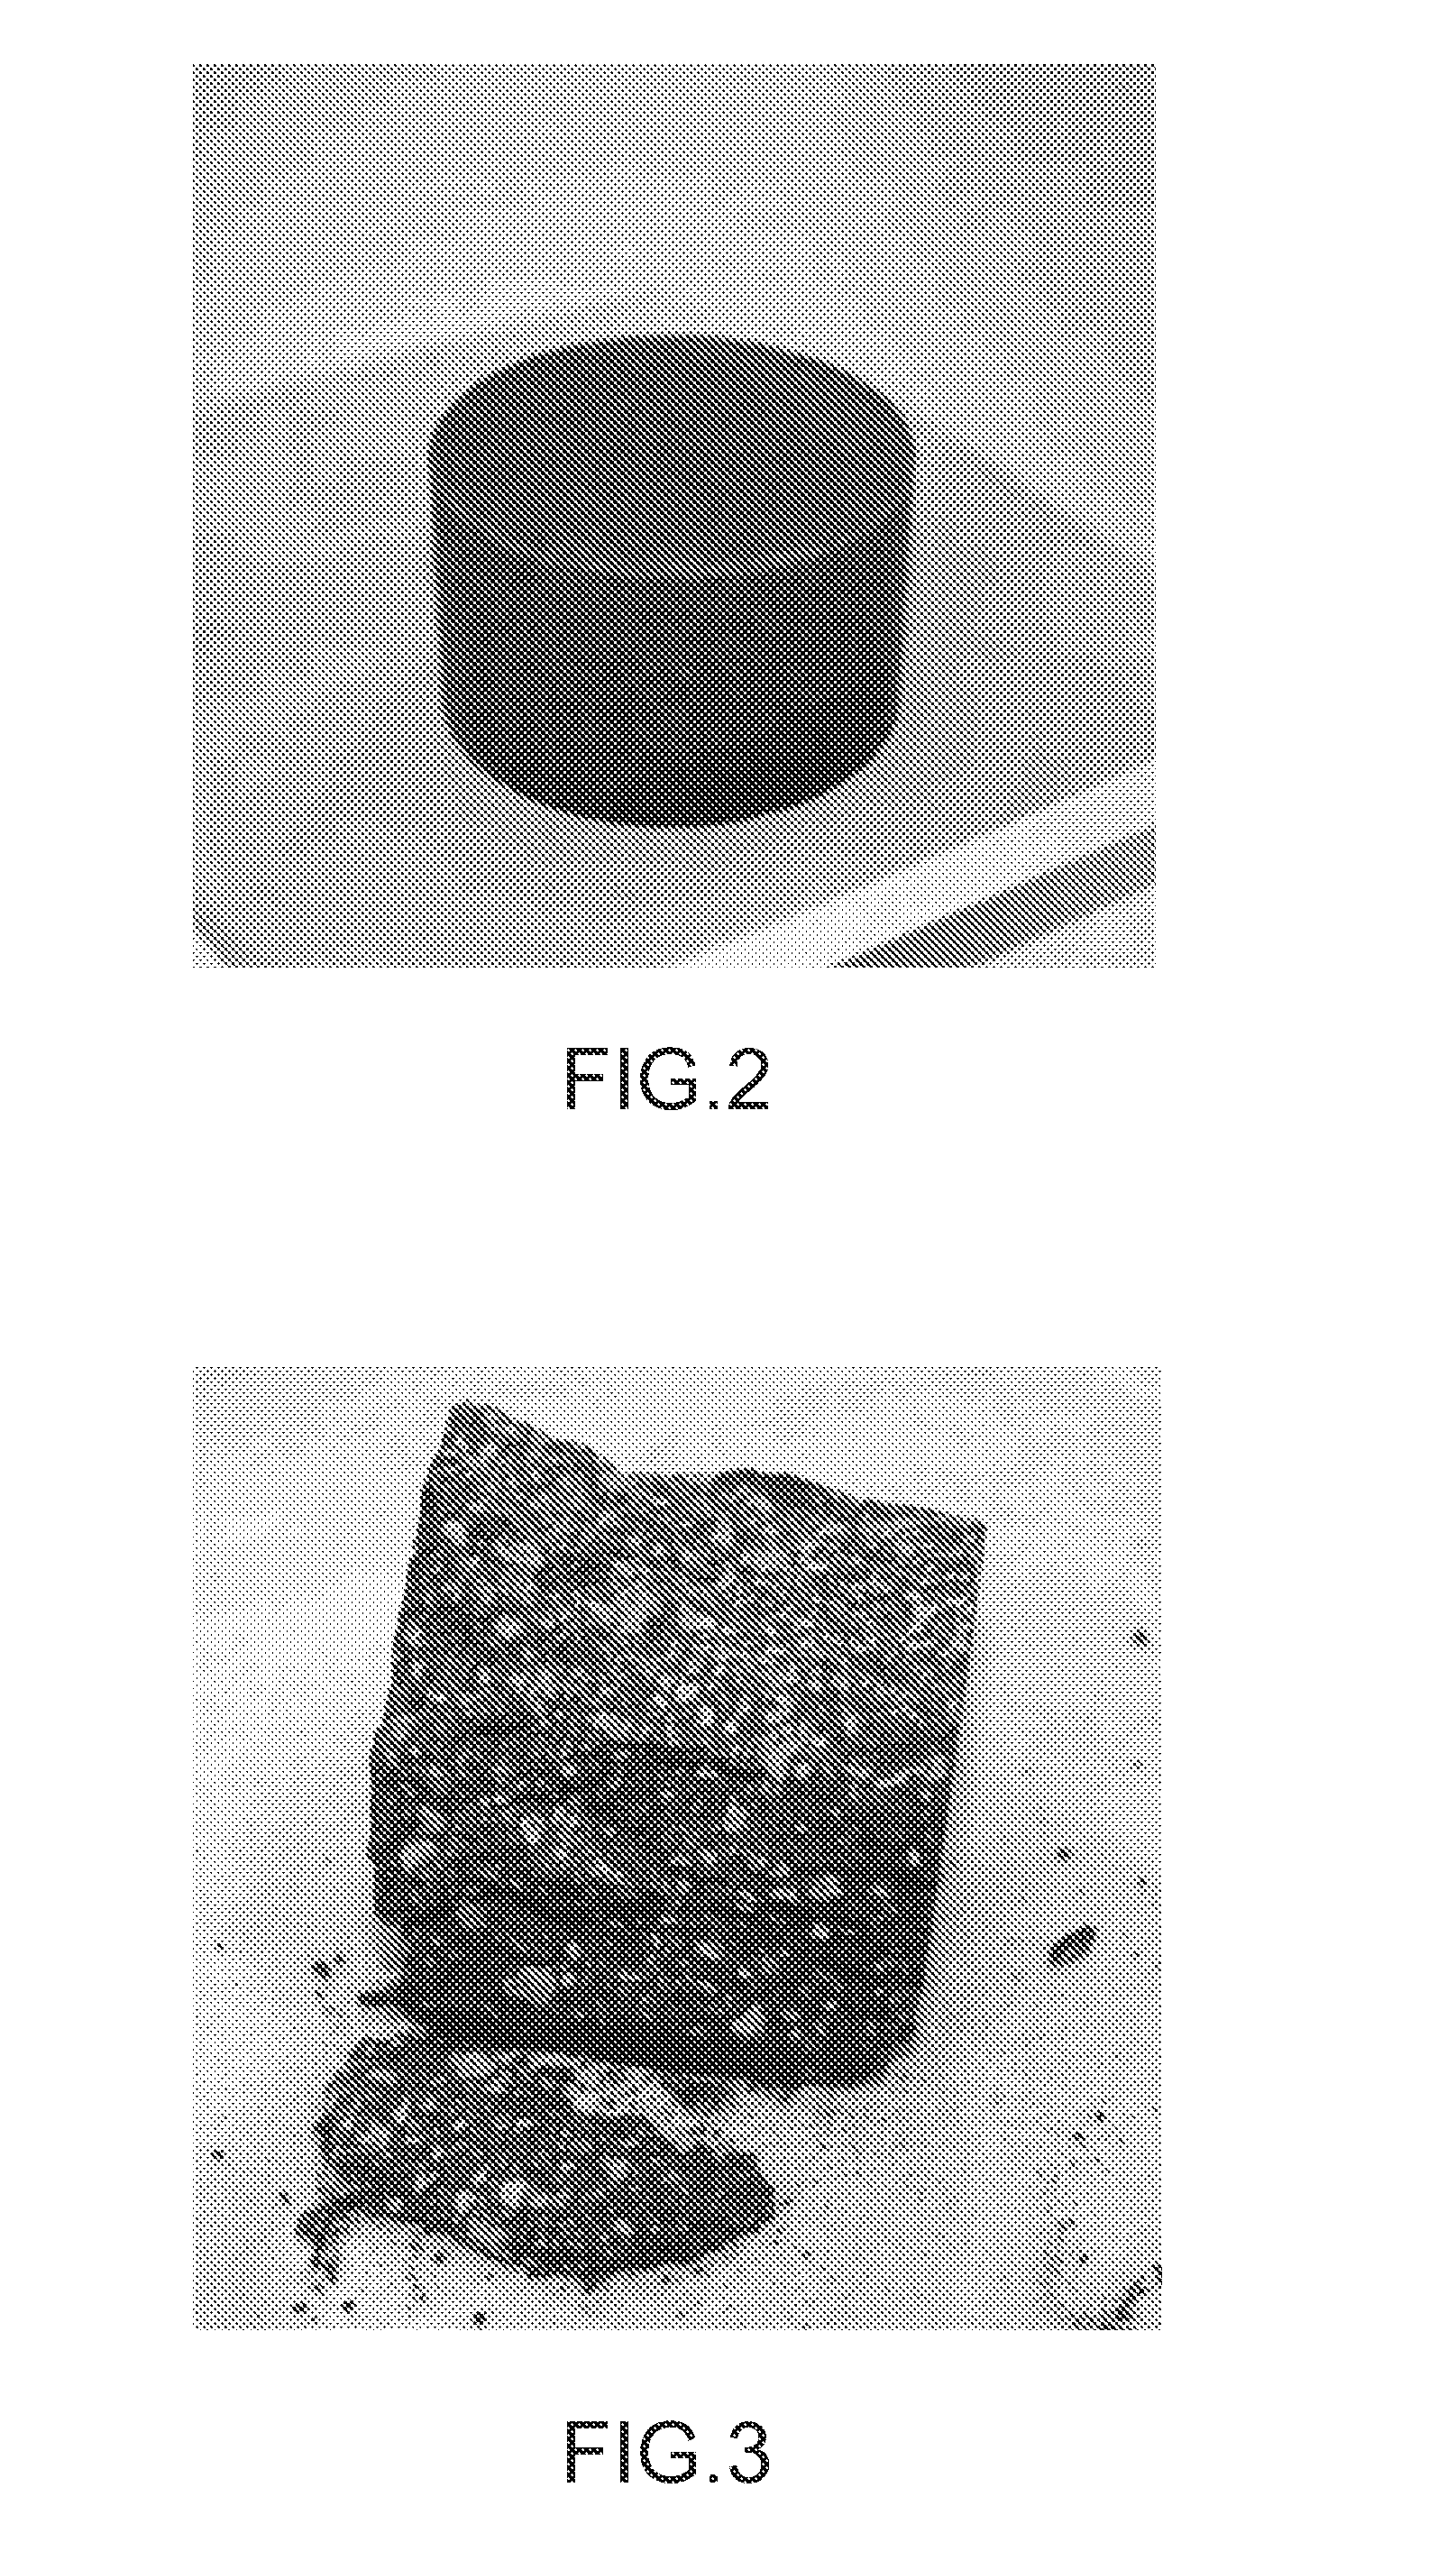 Method for preparing a composite material from waste and resulting material